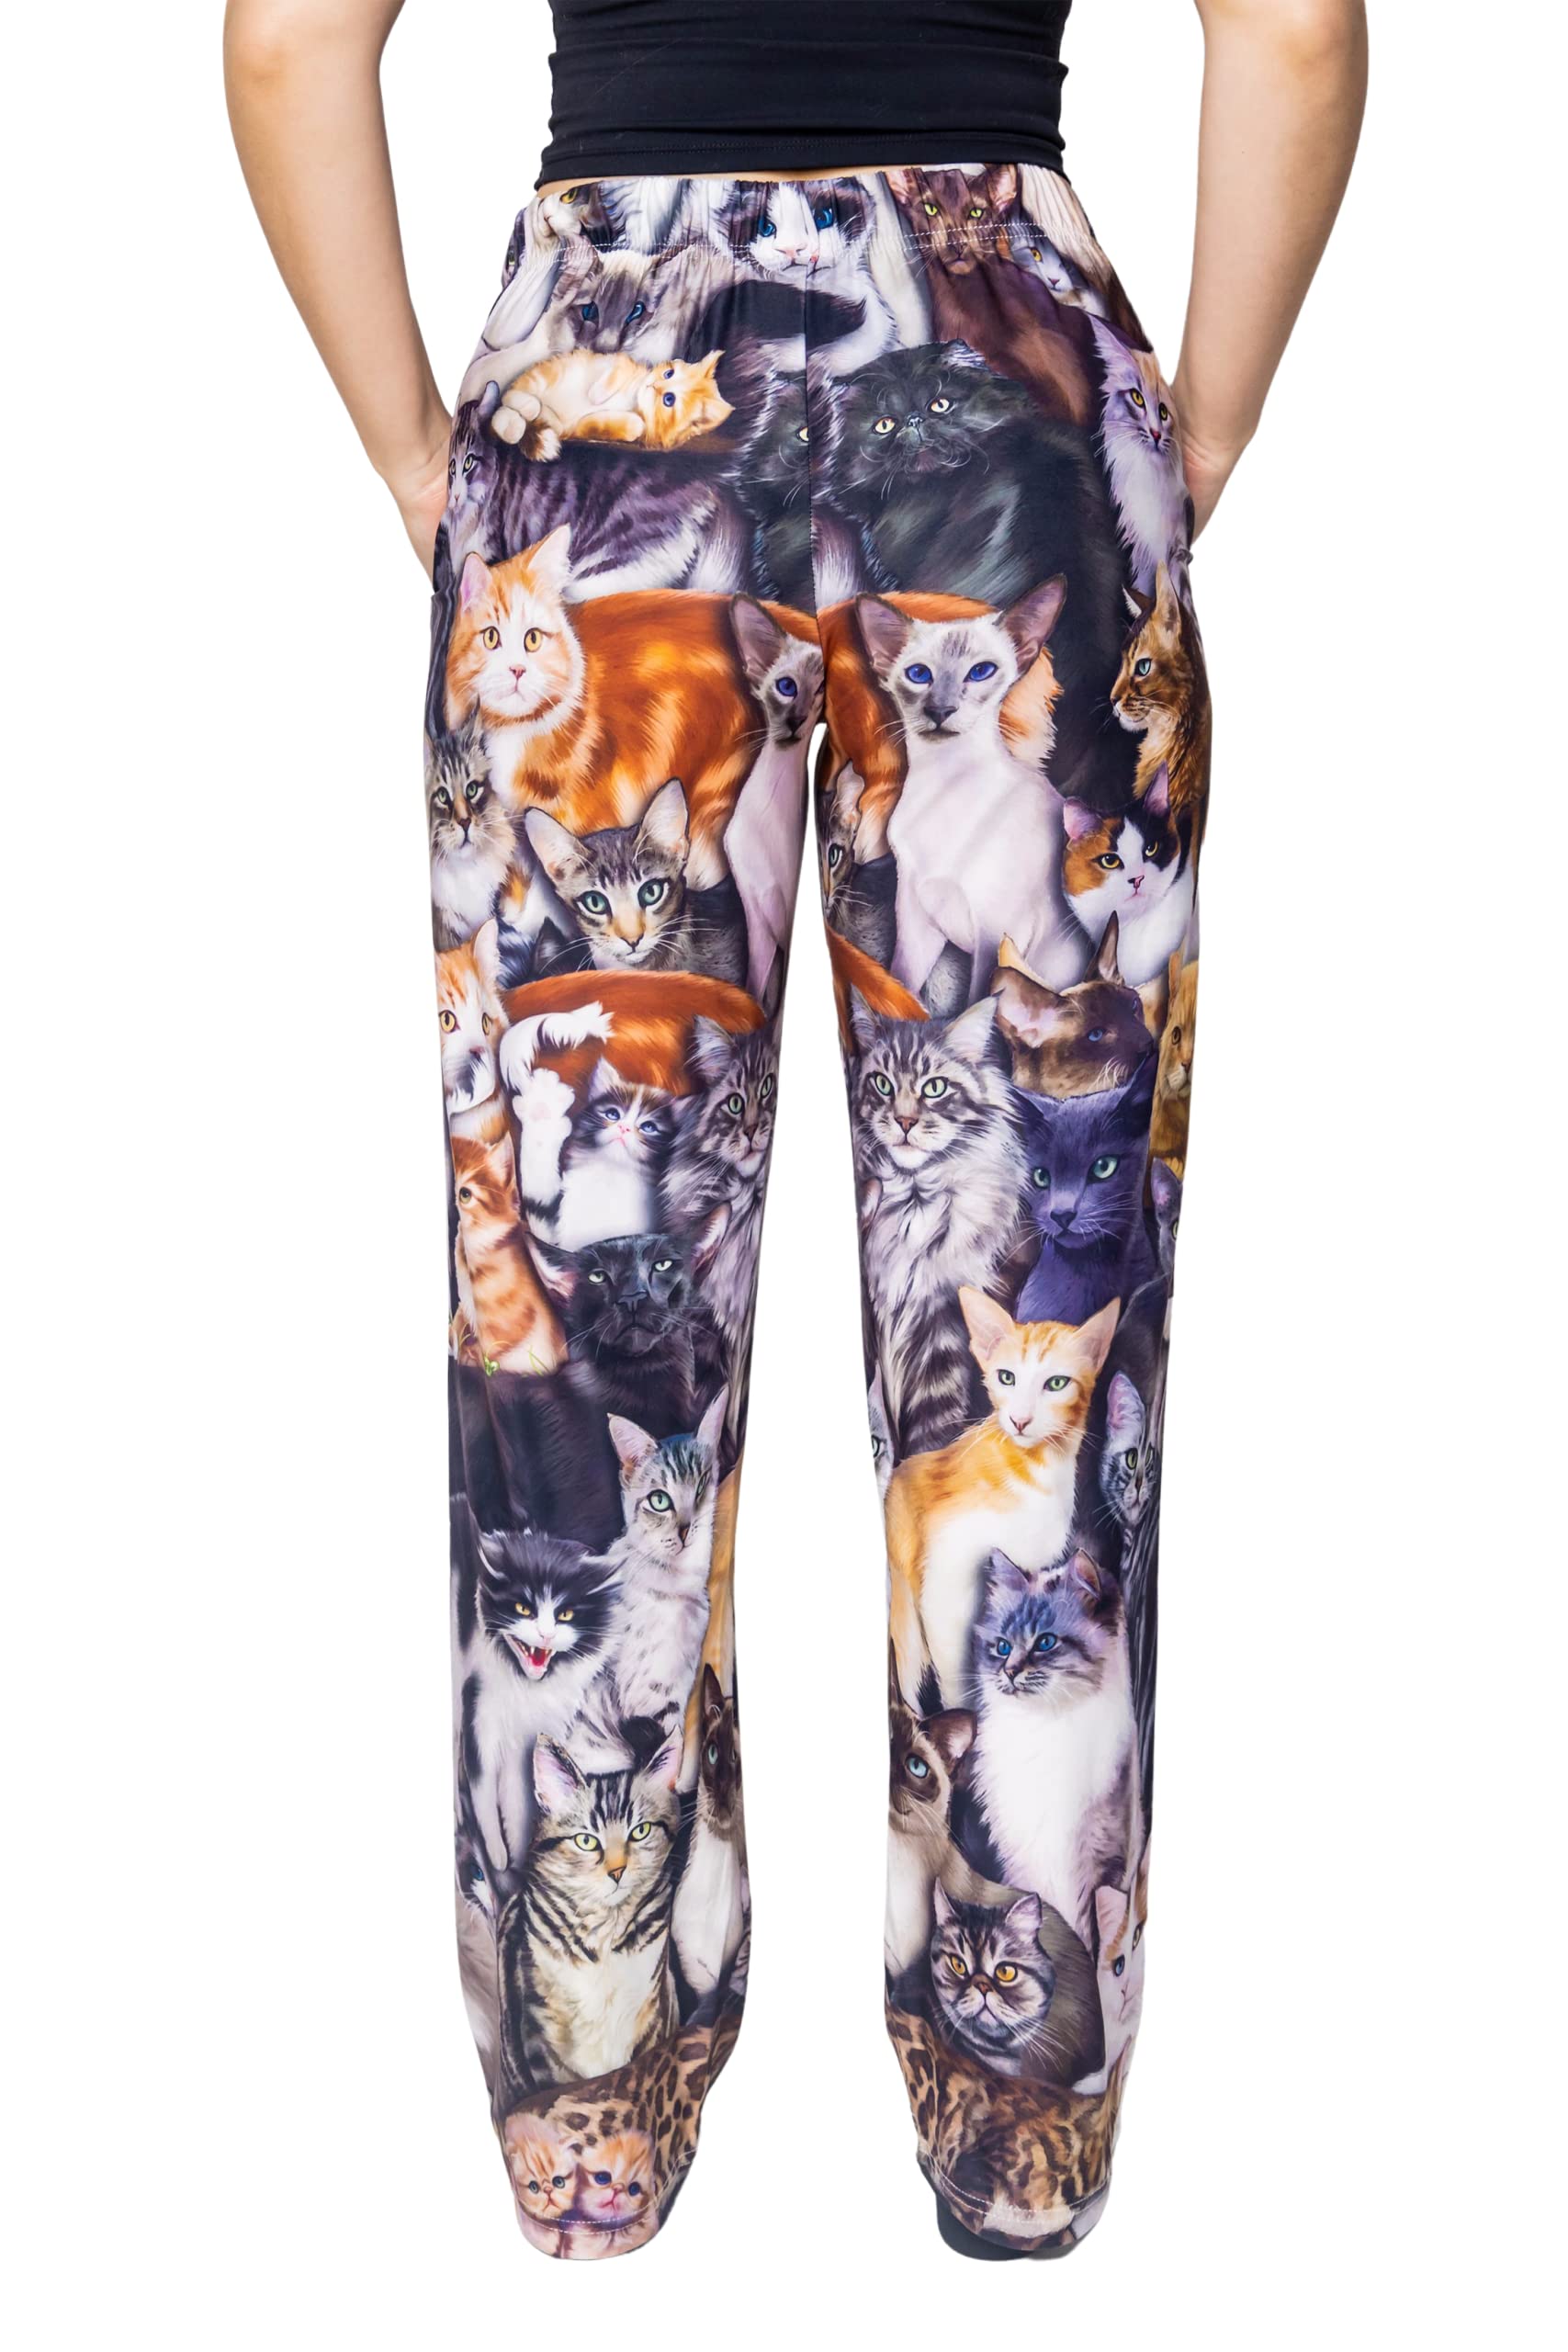 Waist down photo of model wearing All Over Cat pajama lounge pants back view (white background)